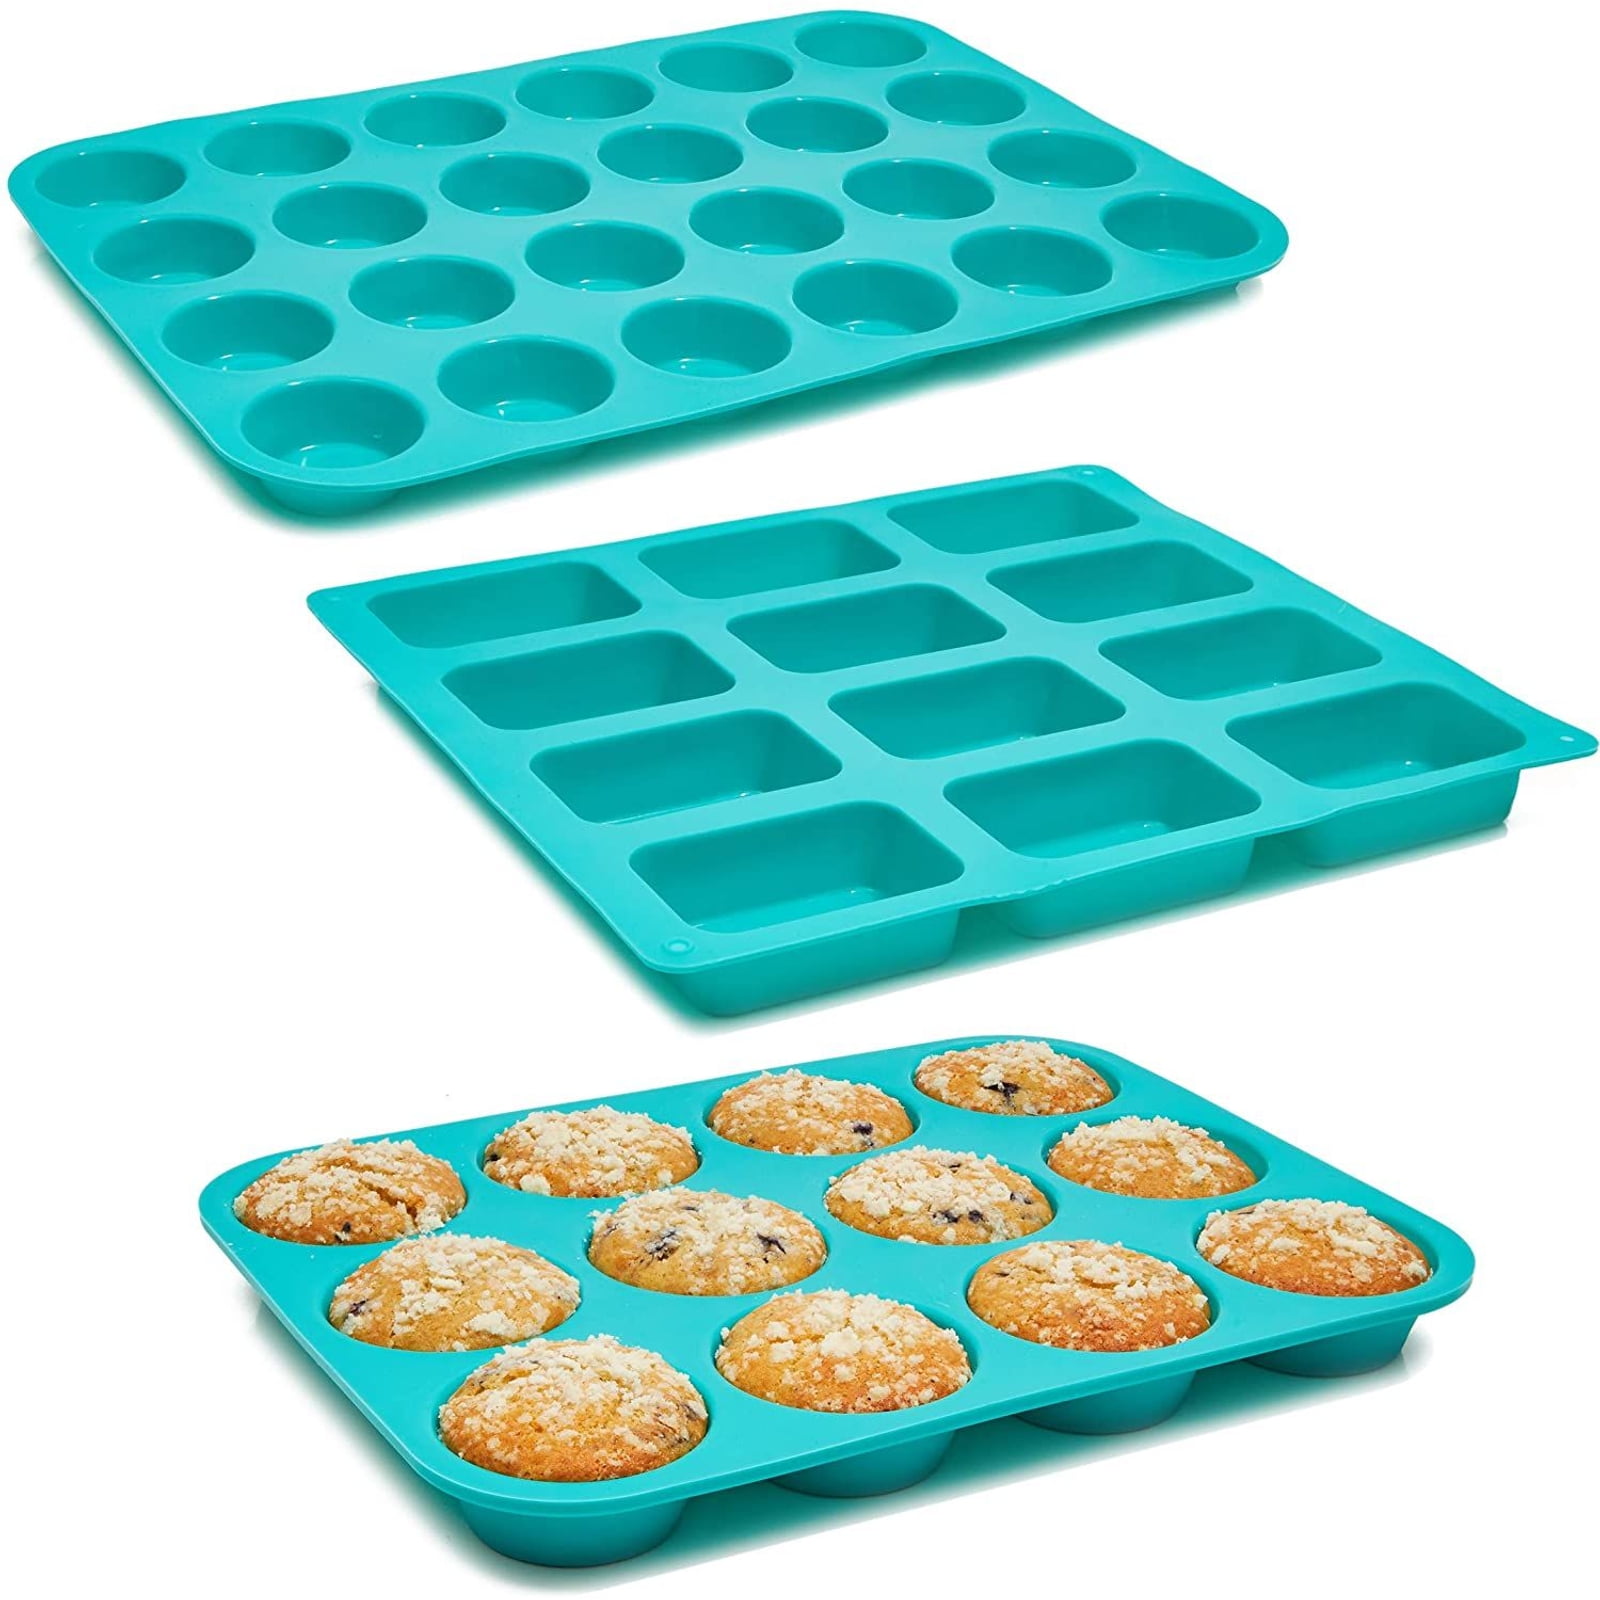 Brownie set of 10 rectangular Muffin cup pudding jel Silicone cake mold 